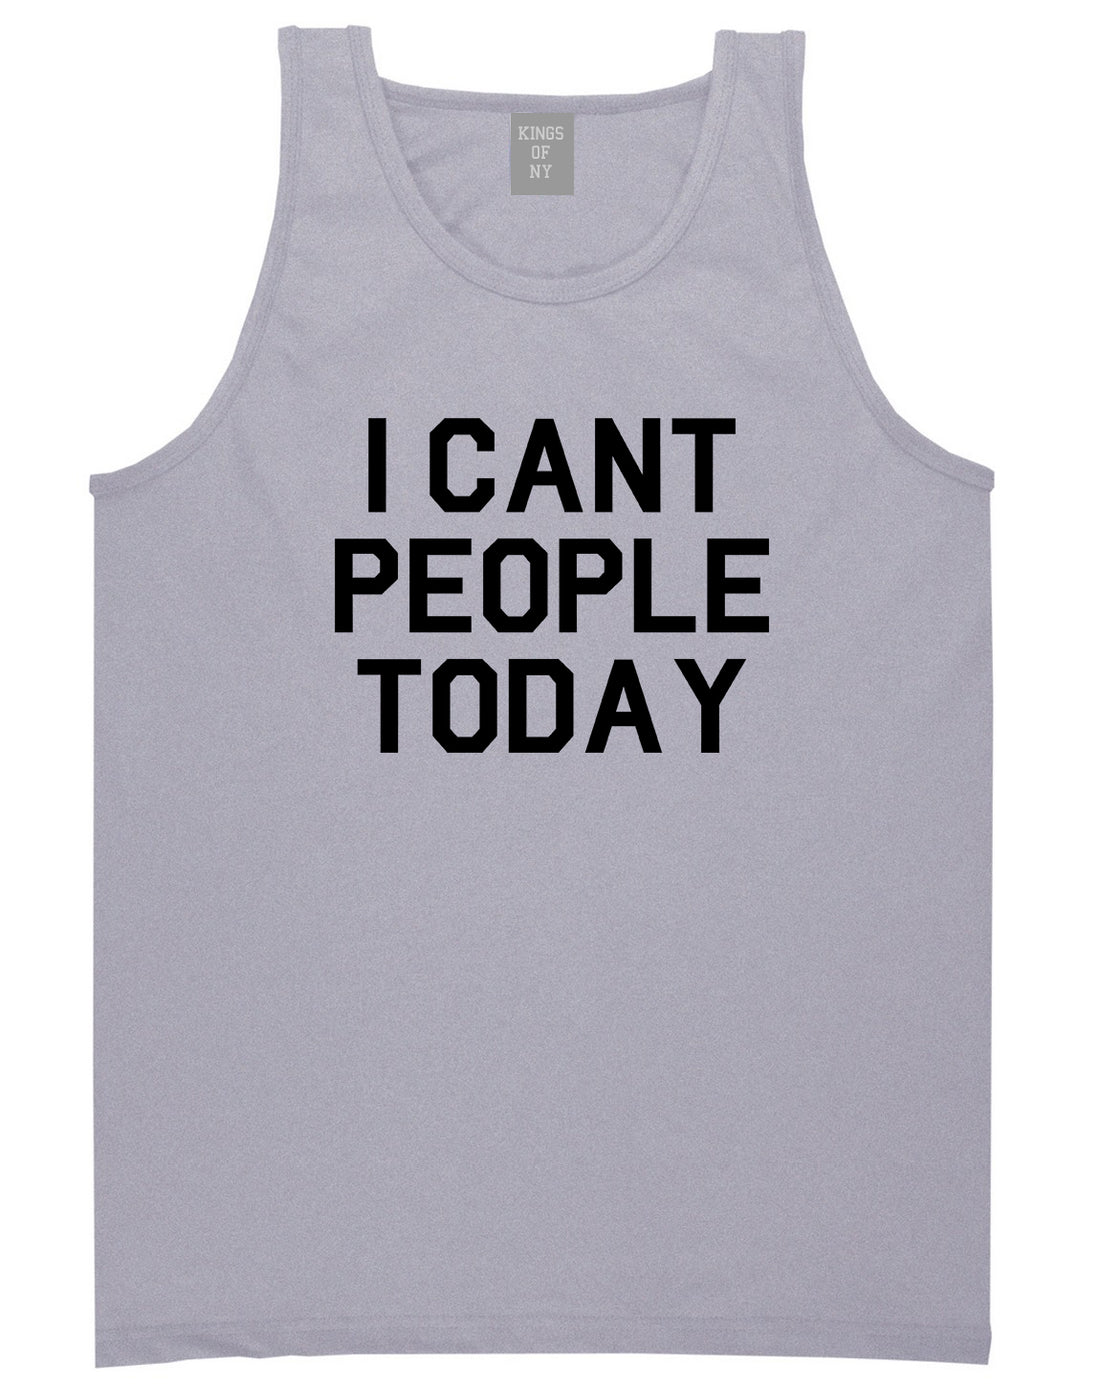 I Cant People Today Funny Mens Tank Top Shirt Grey